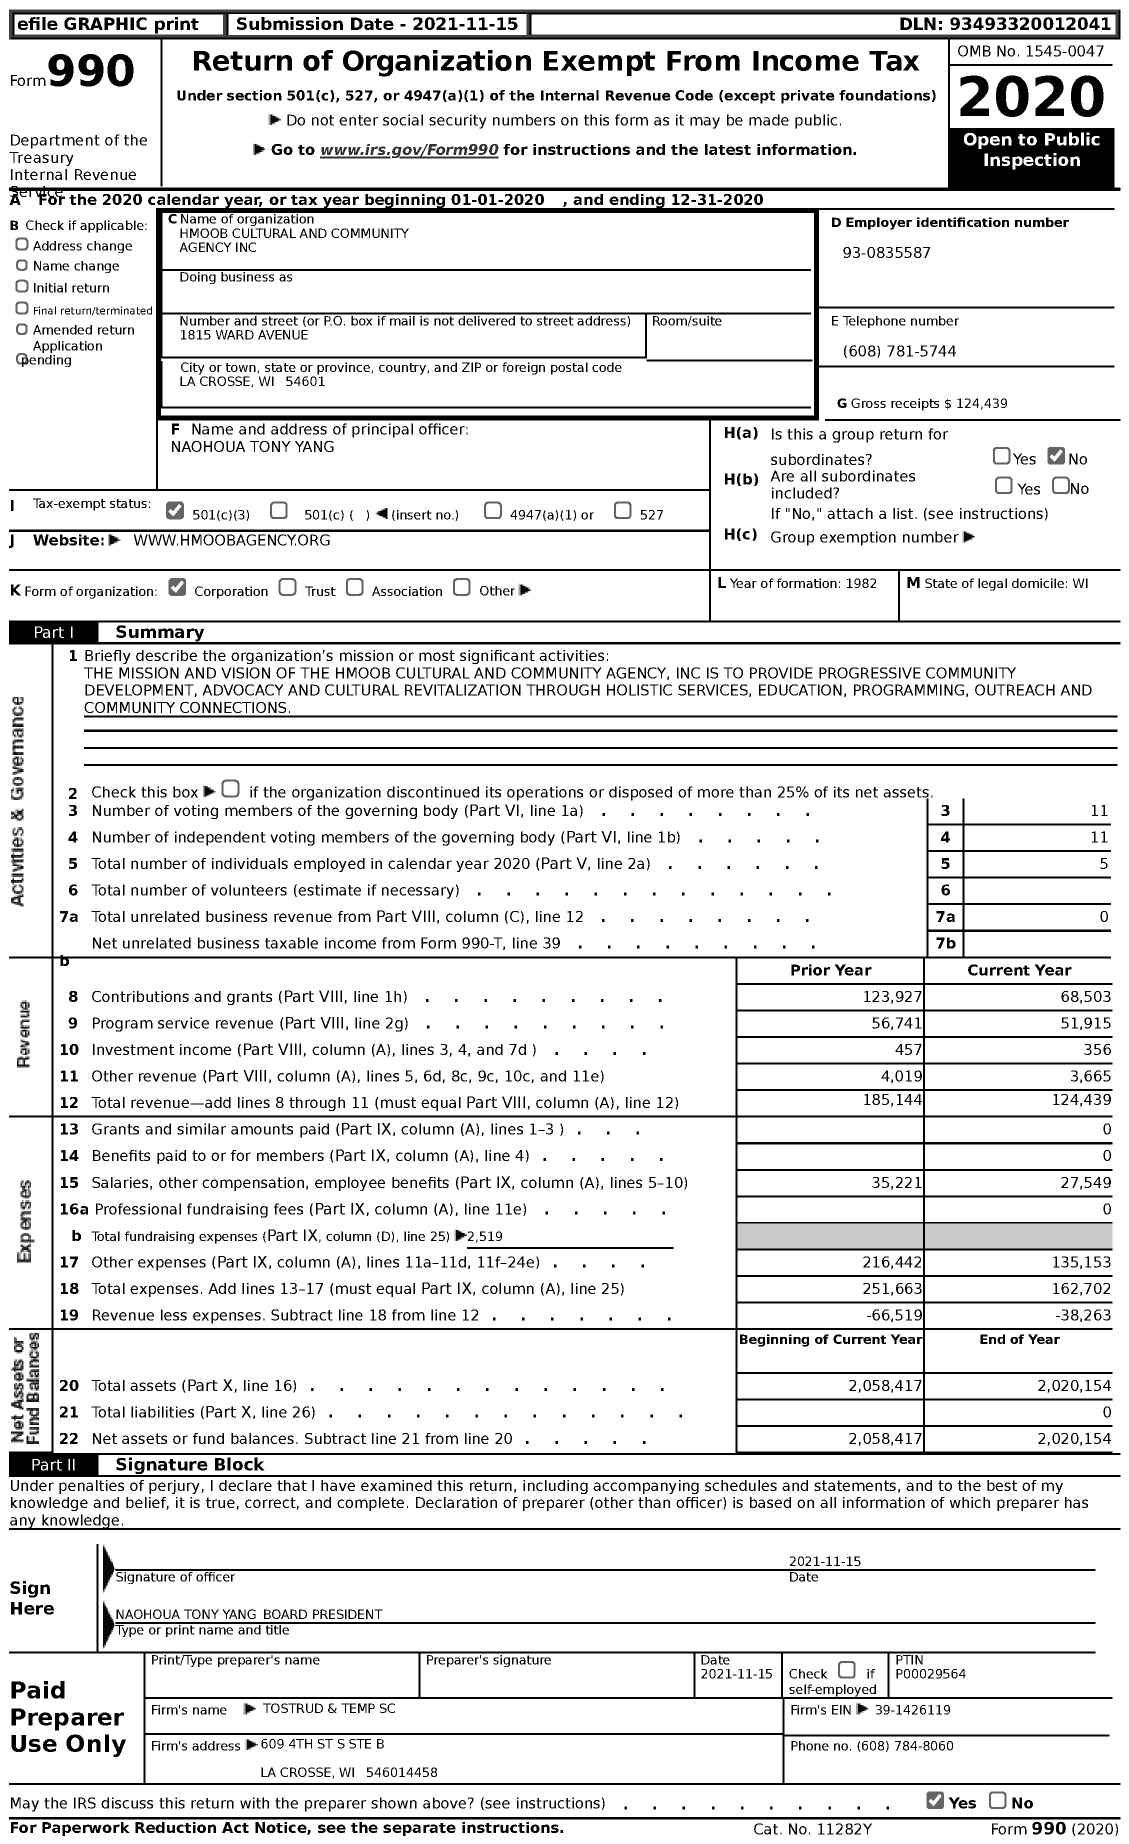 Image of first page of 2020 Form 990 for Hmoob Cultural and Community Agency